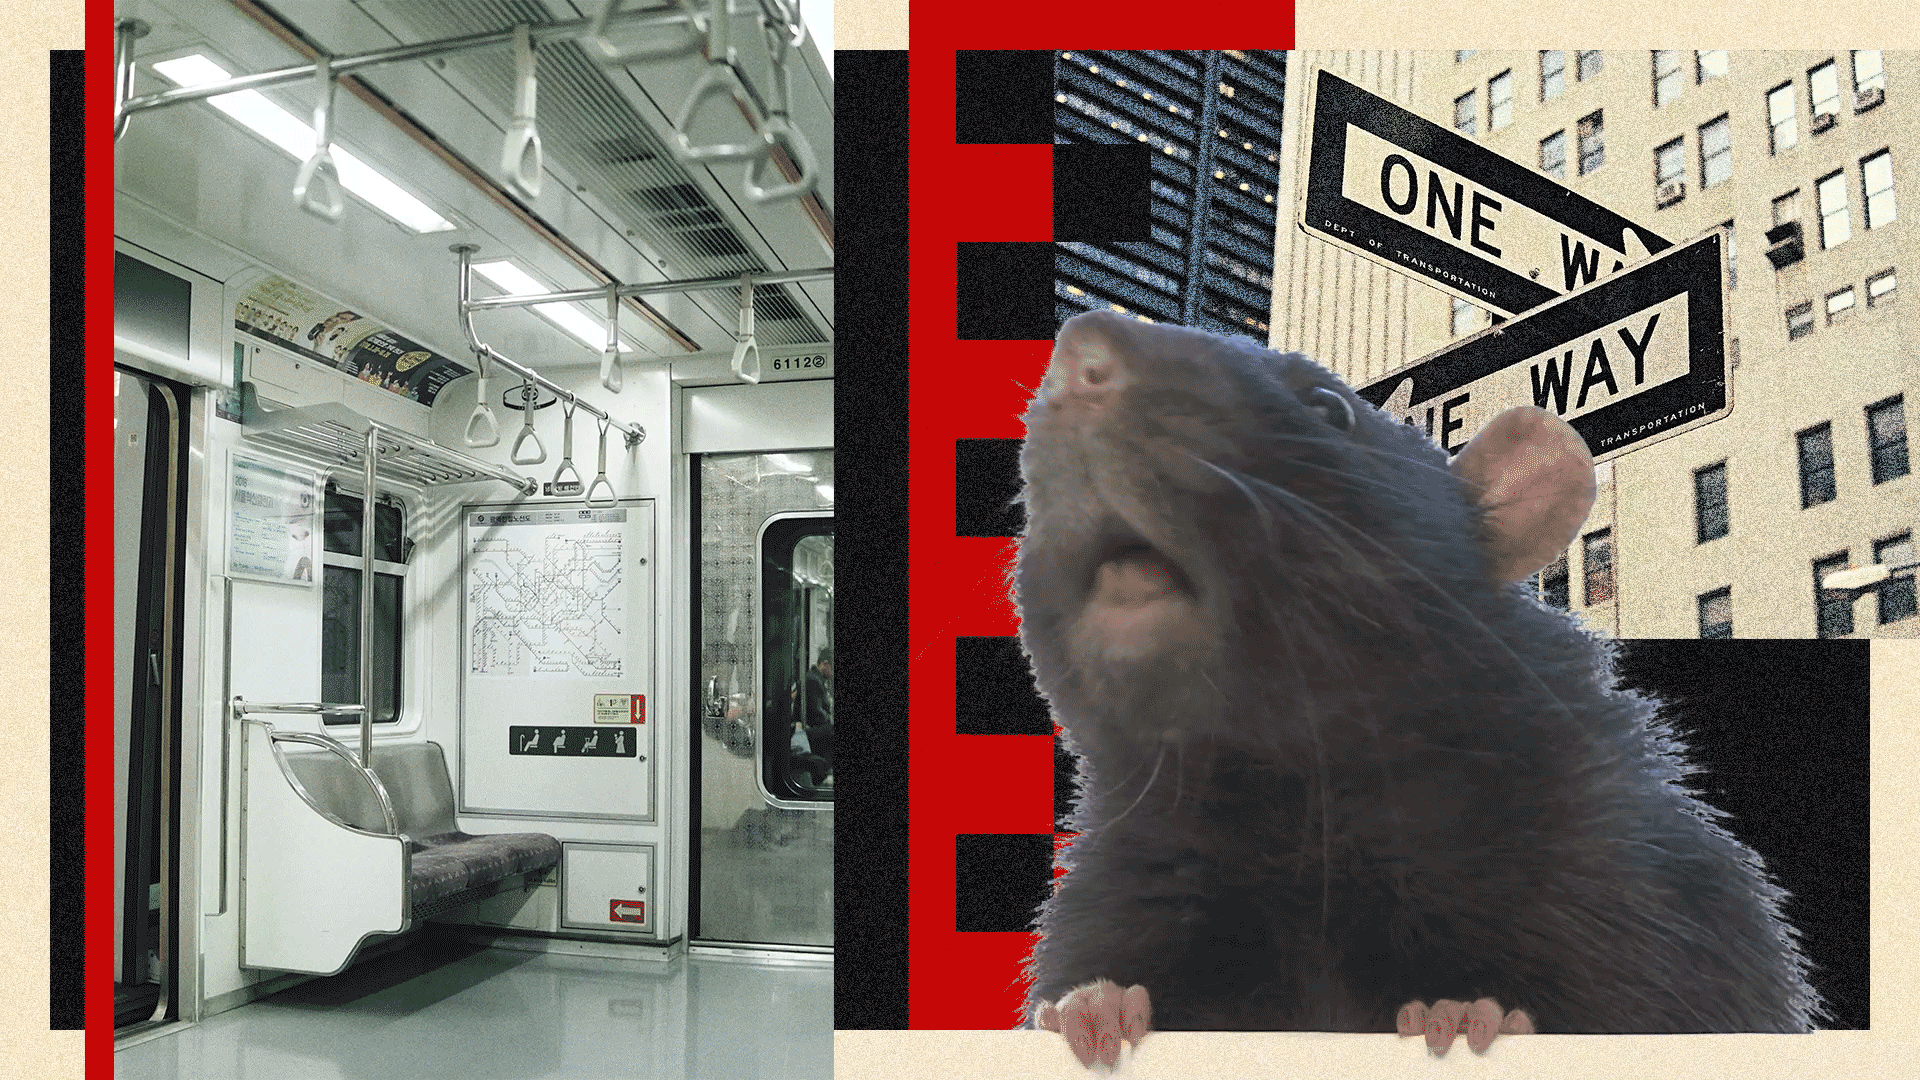 Rat sniffing on collage background of New York subway and one way sign